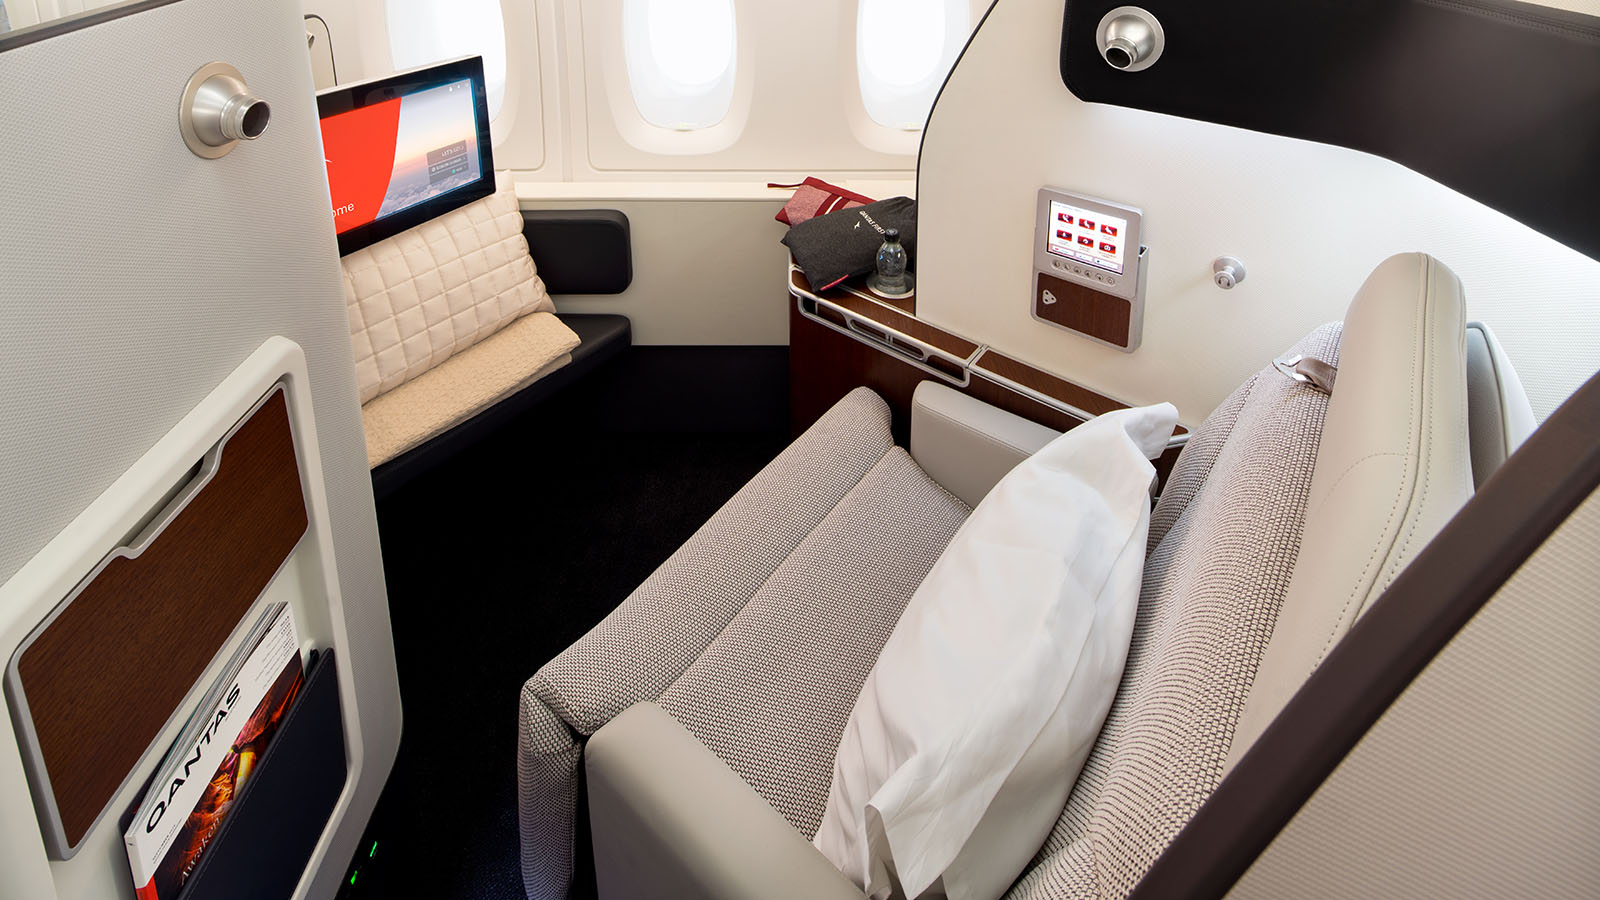 Suite in Qantas First